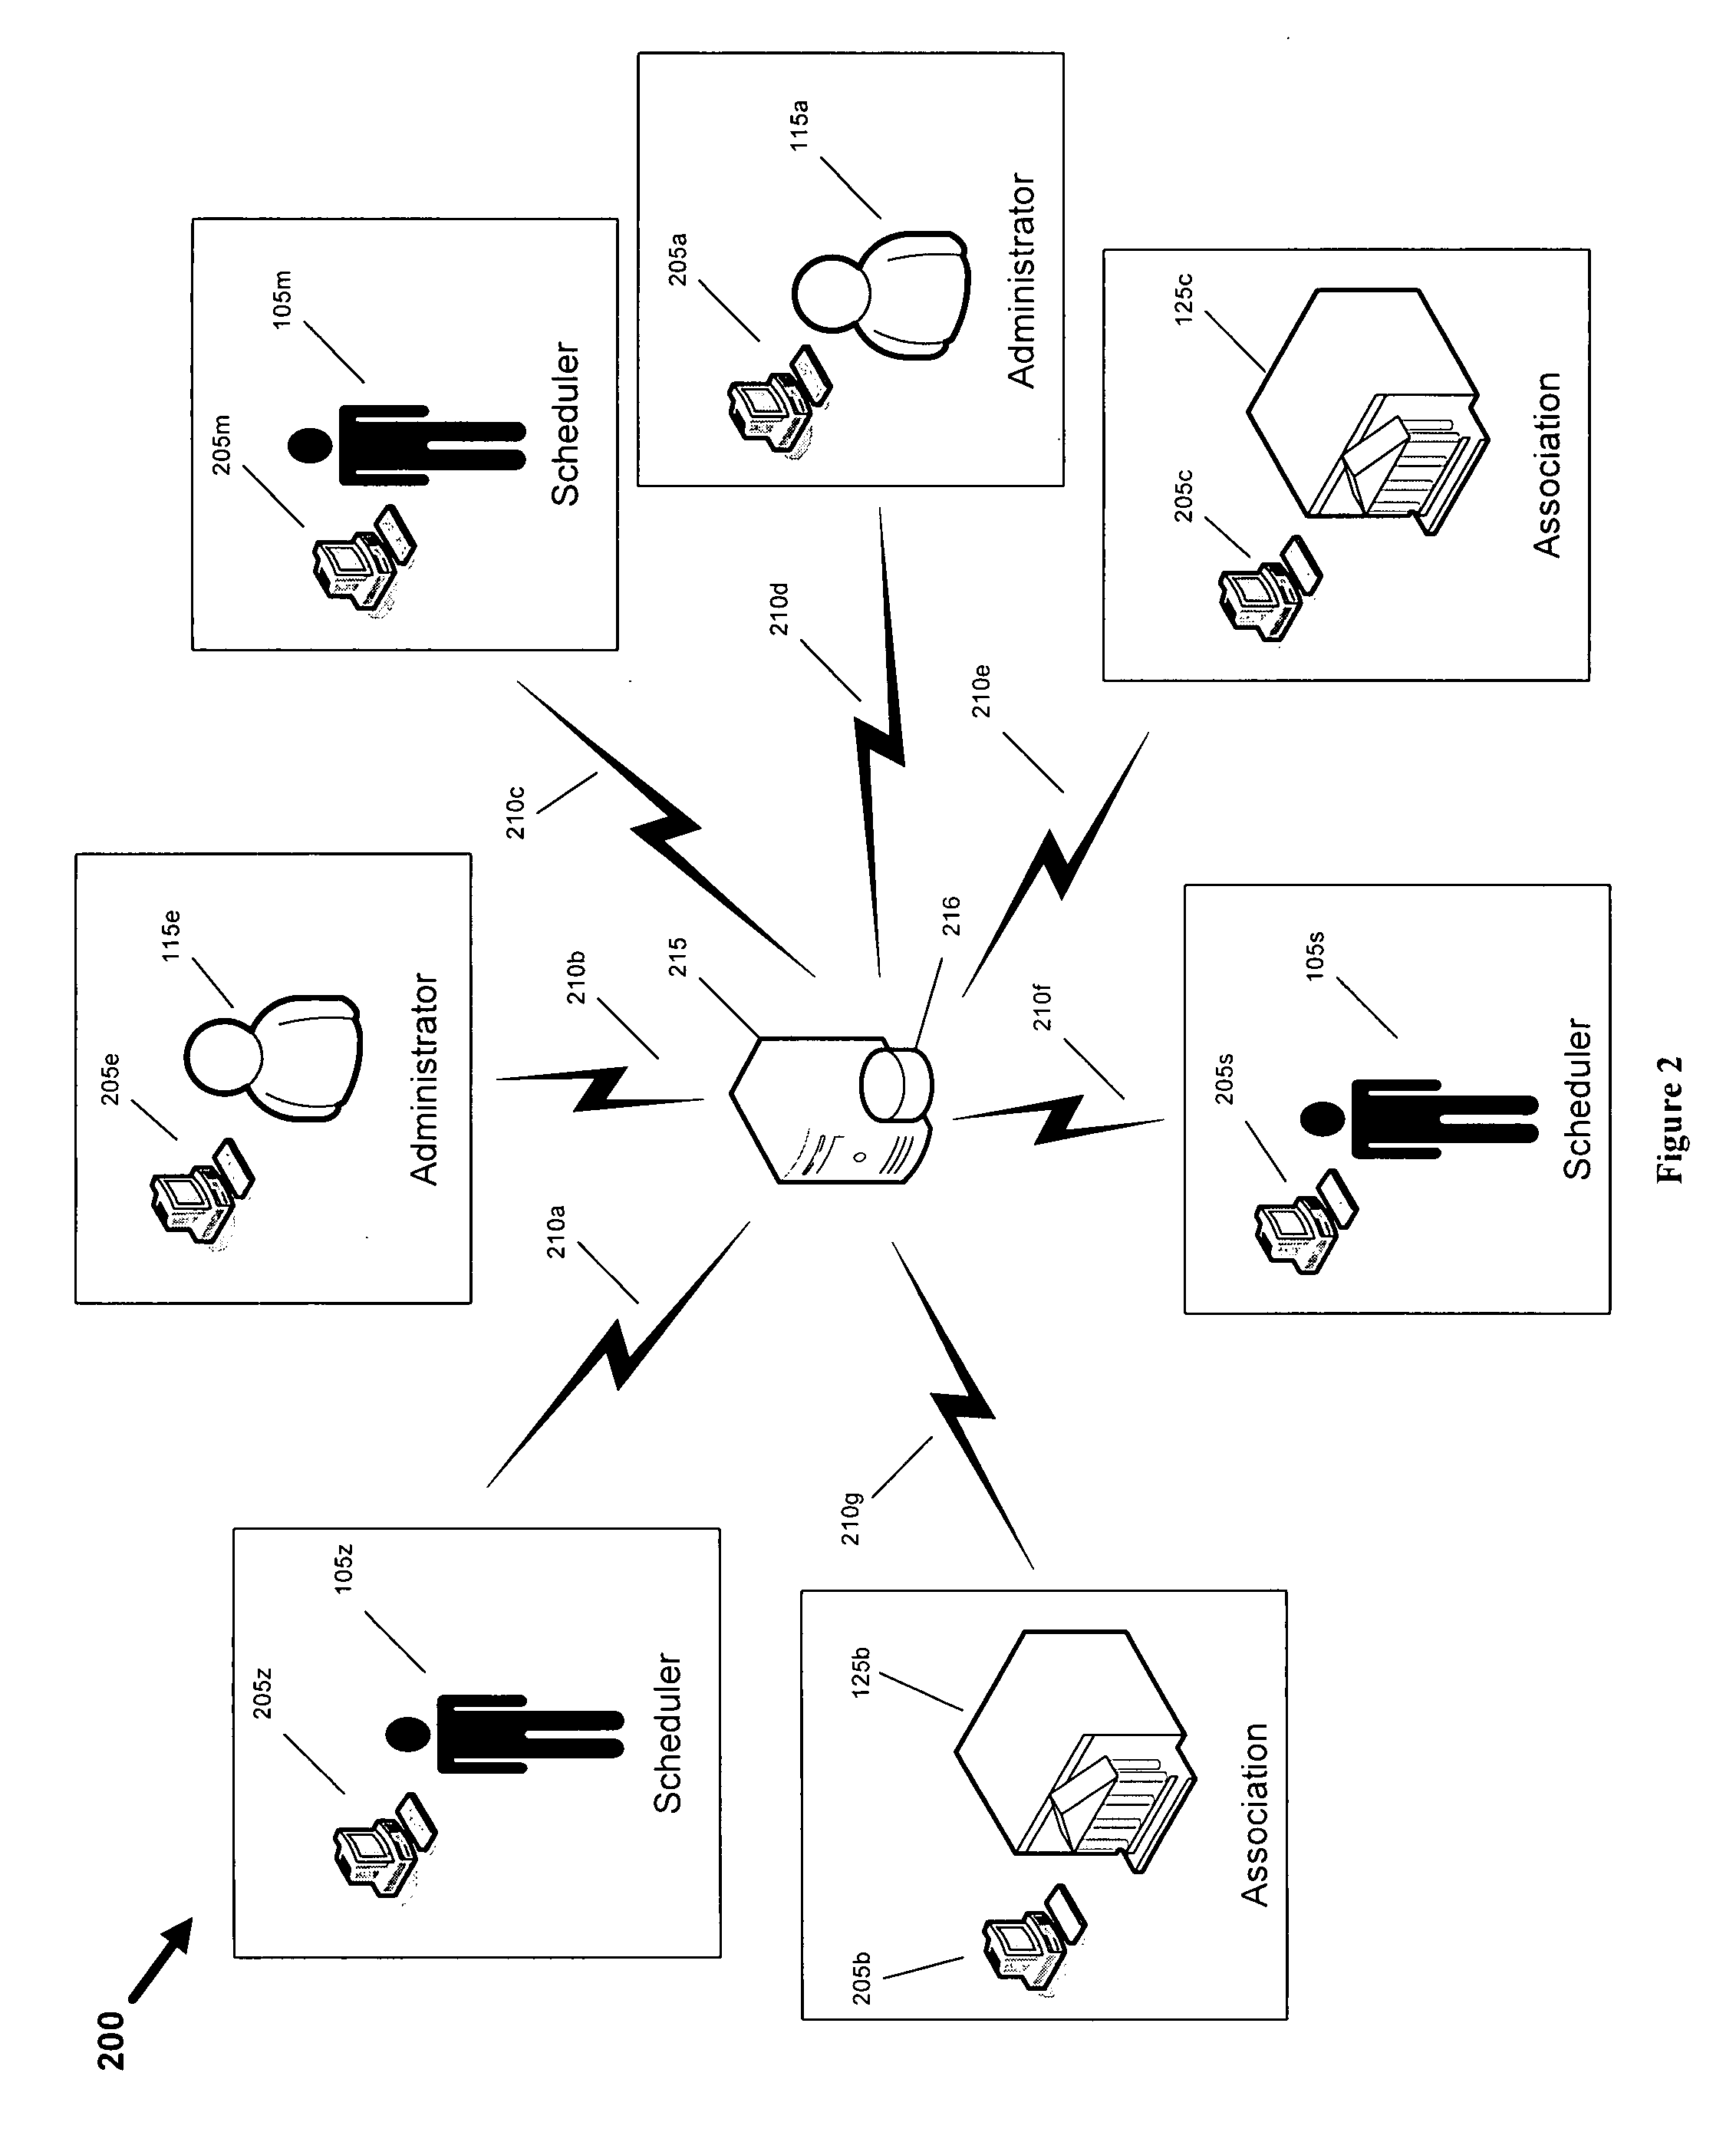 System and method for web-based sports event scheduling